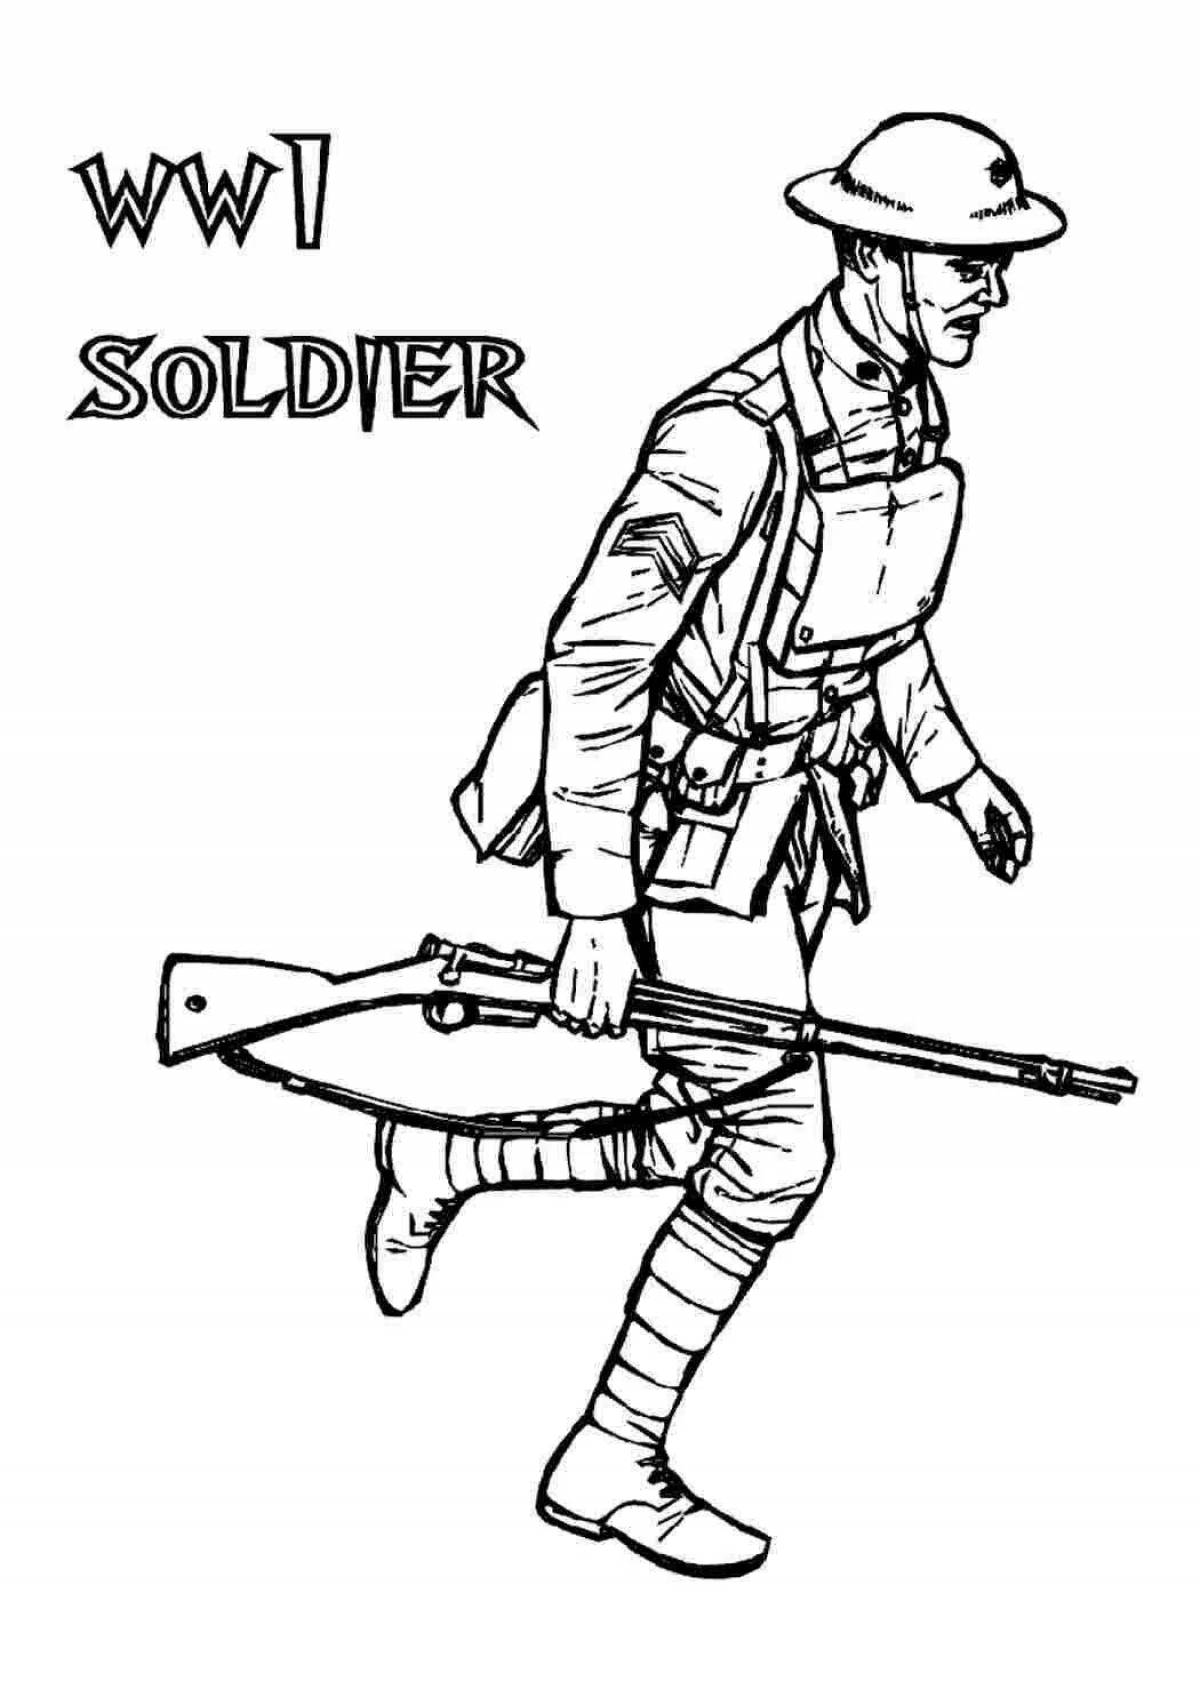 Adorable soldiers coloring pages for boys